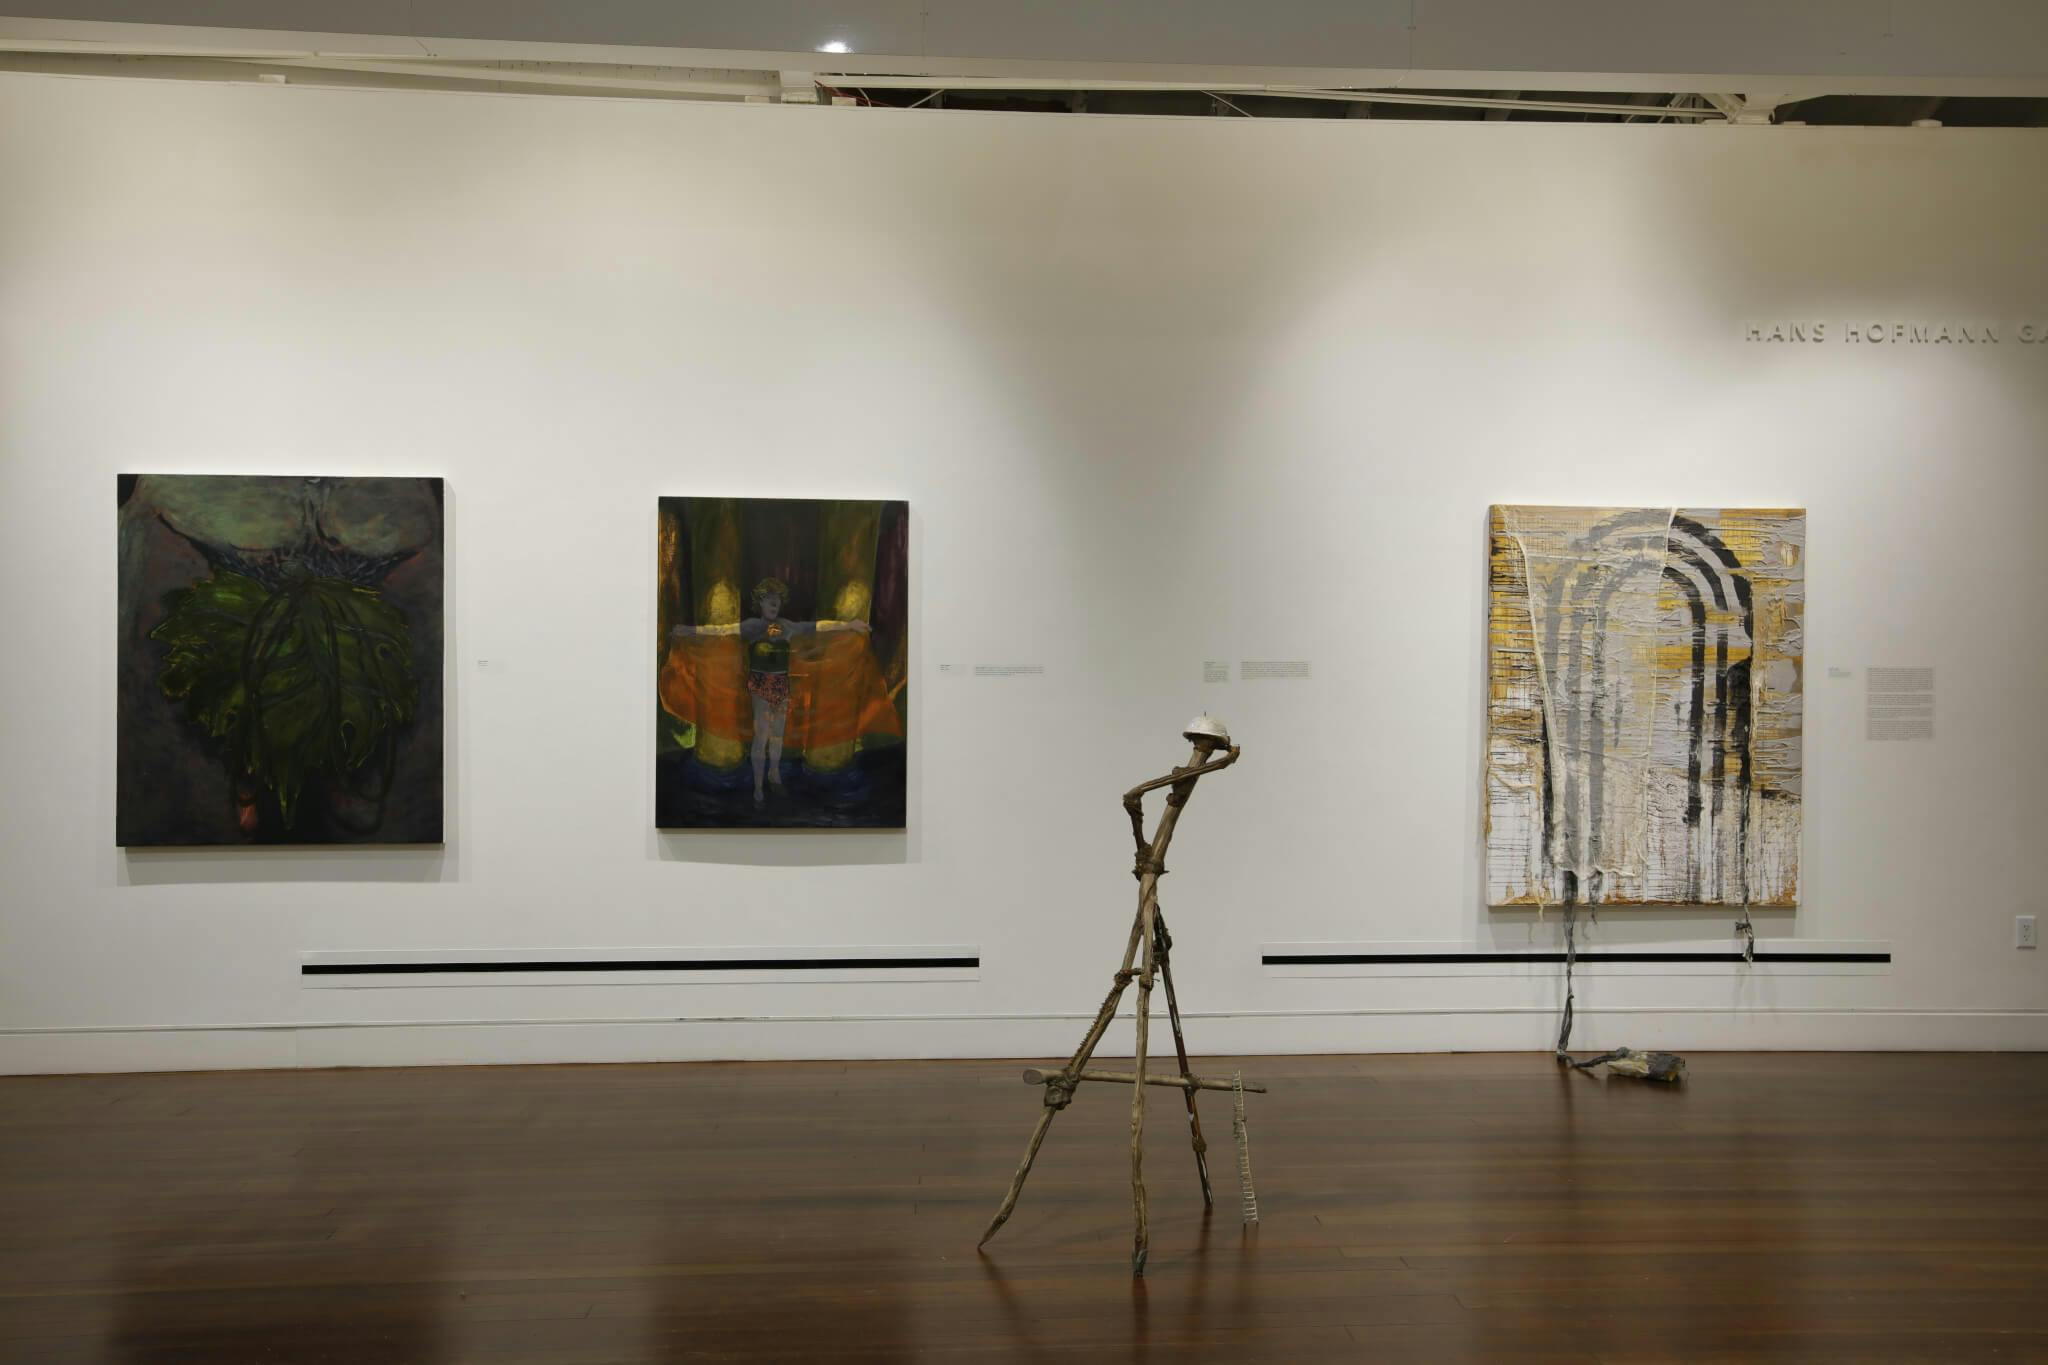 Three paintings adorn the walls of a gallery, while a sculpture stands in the middle.